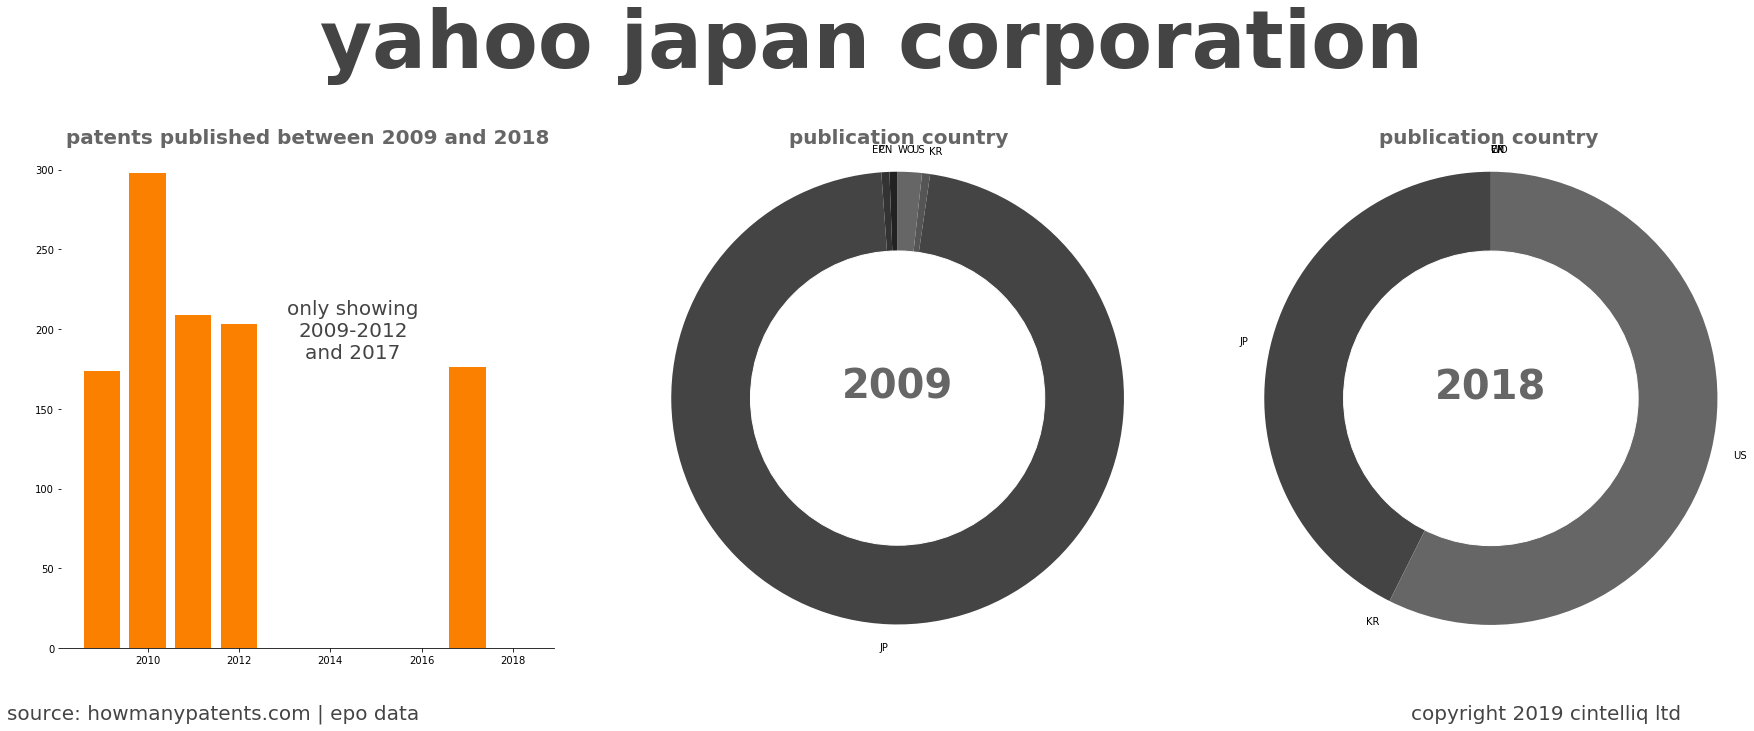 summary of patents for Yahoo Japan Corporation